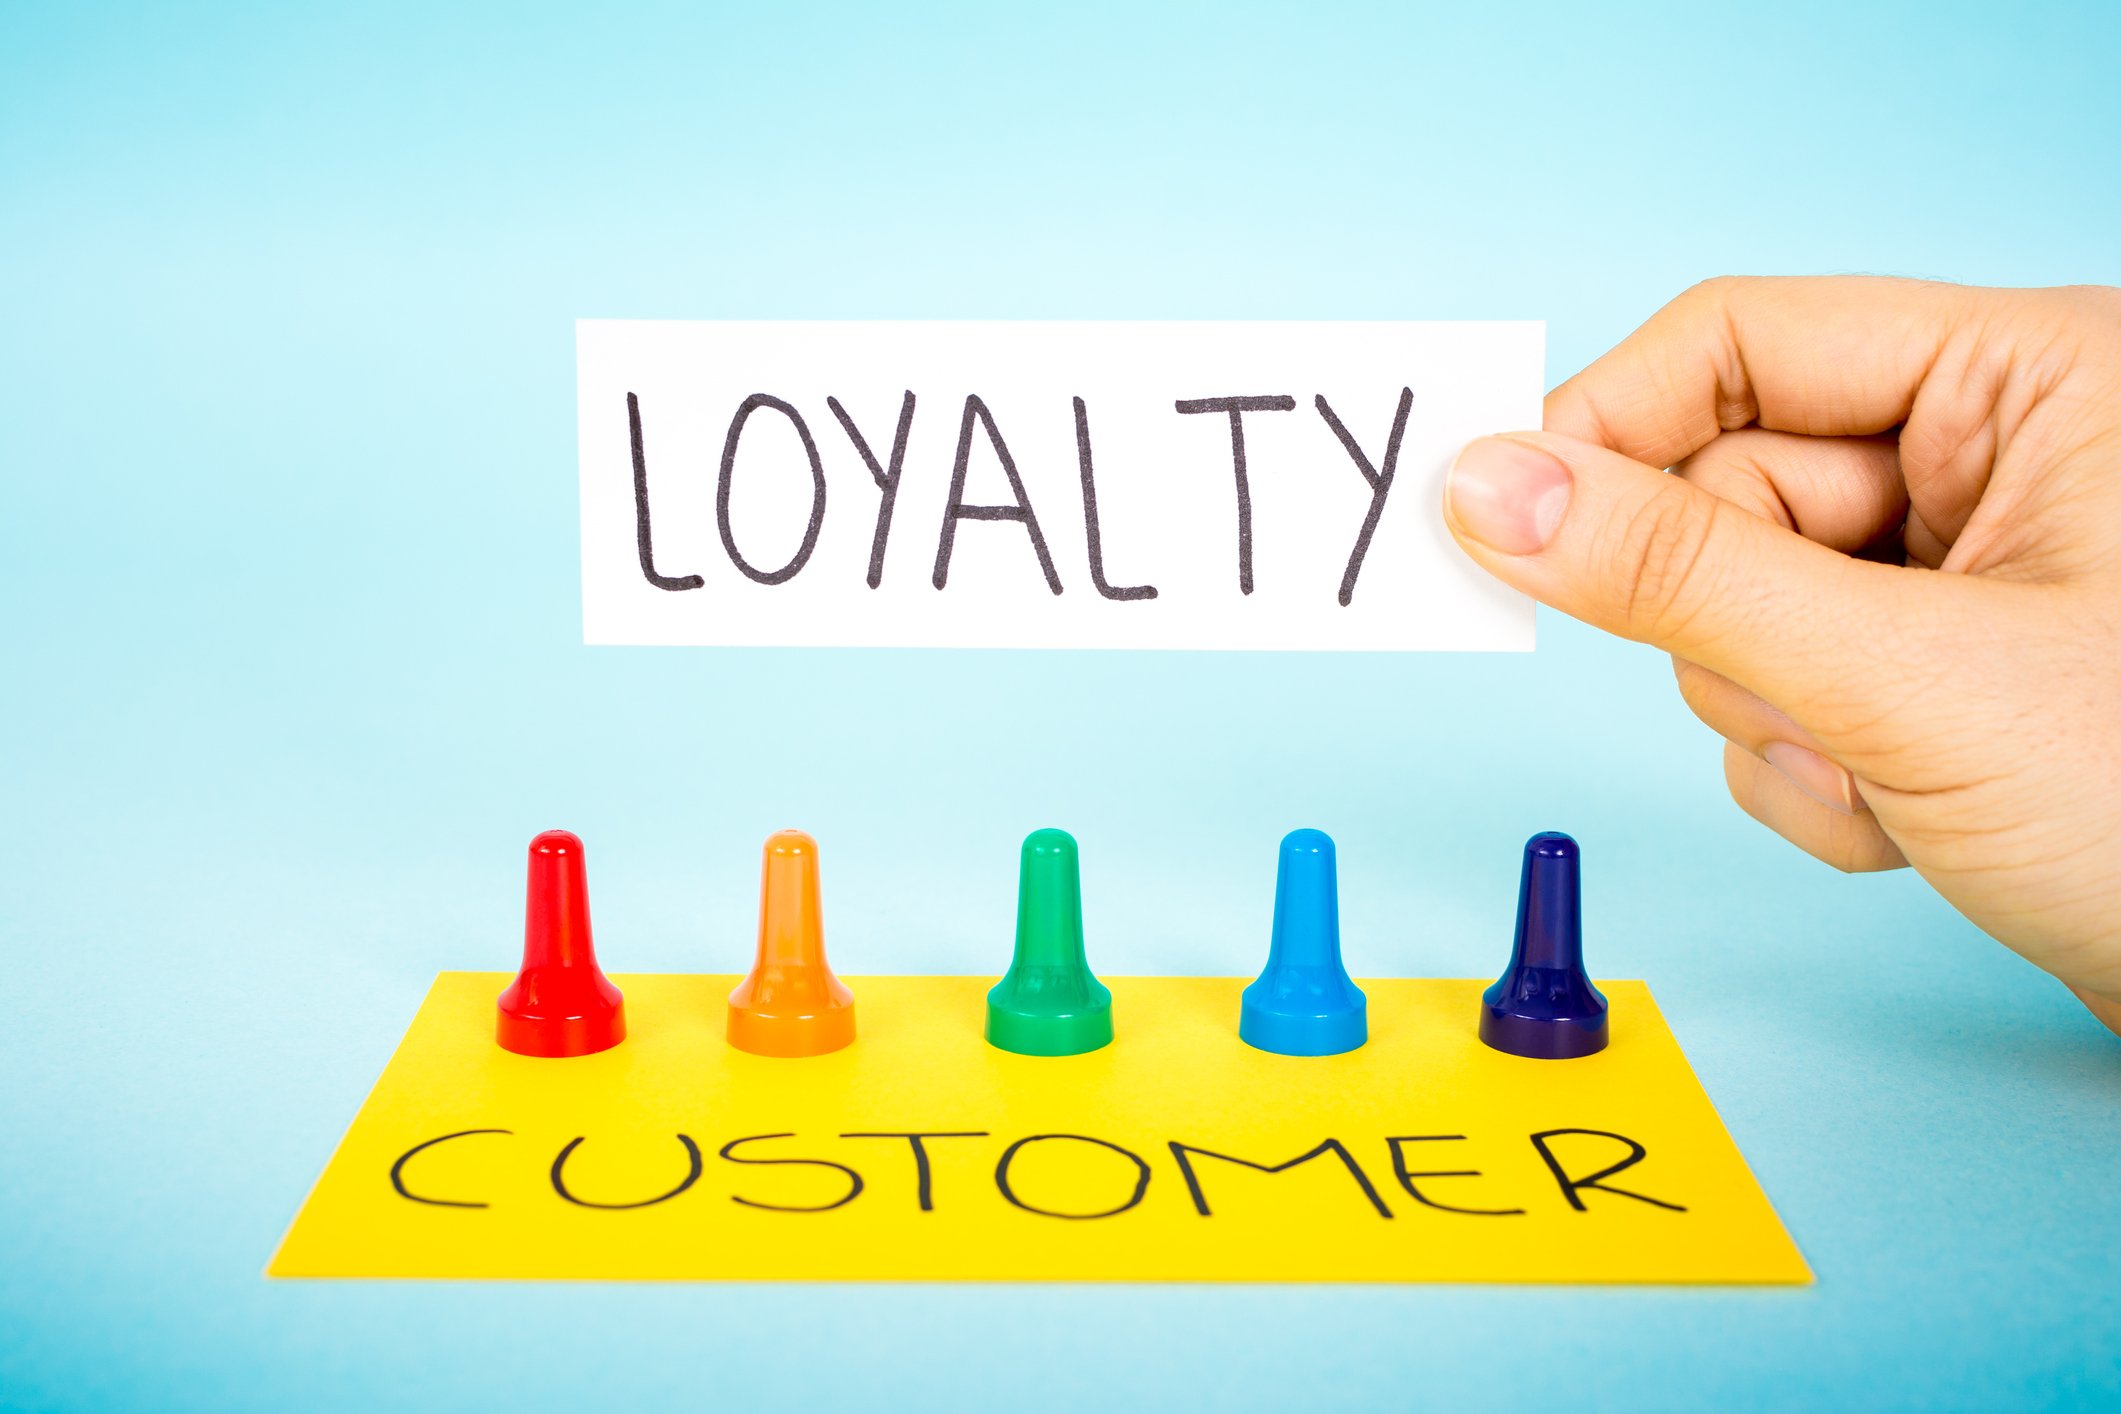 guest-loyalty-is-changing-here-s-how-to-capitalize-on-it-hotel